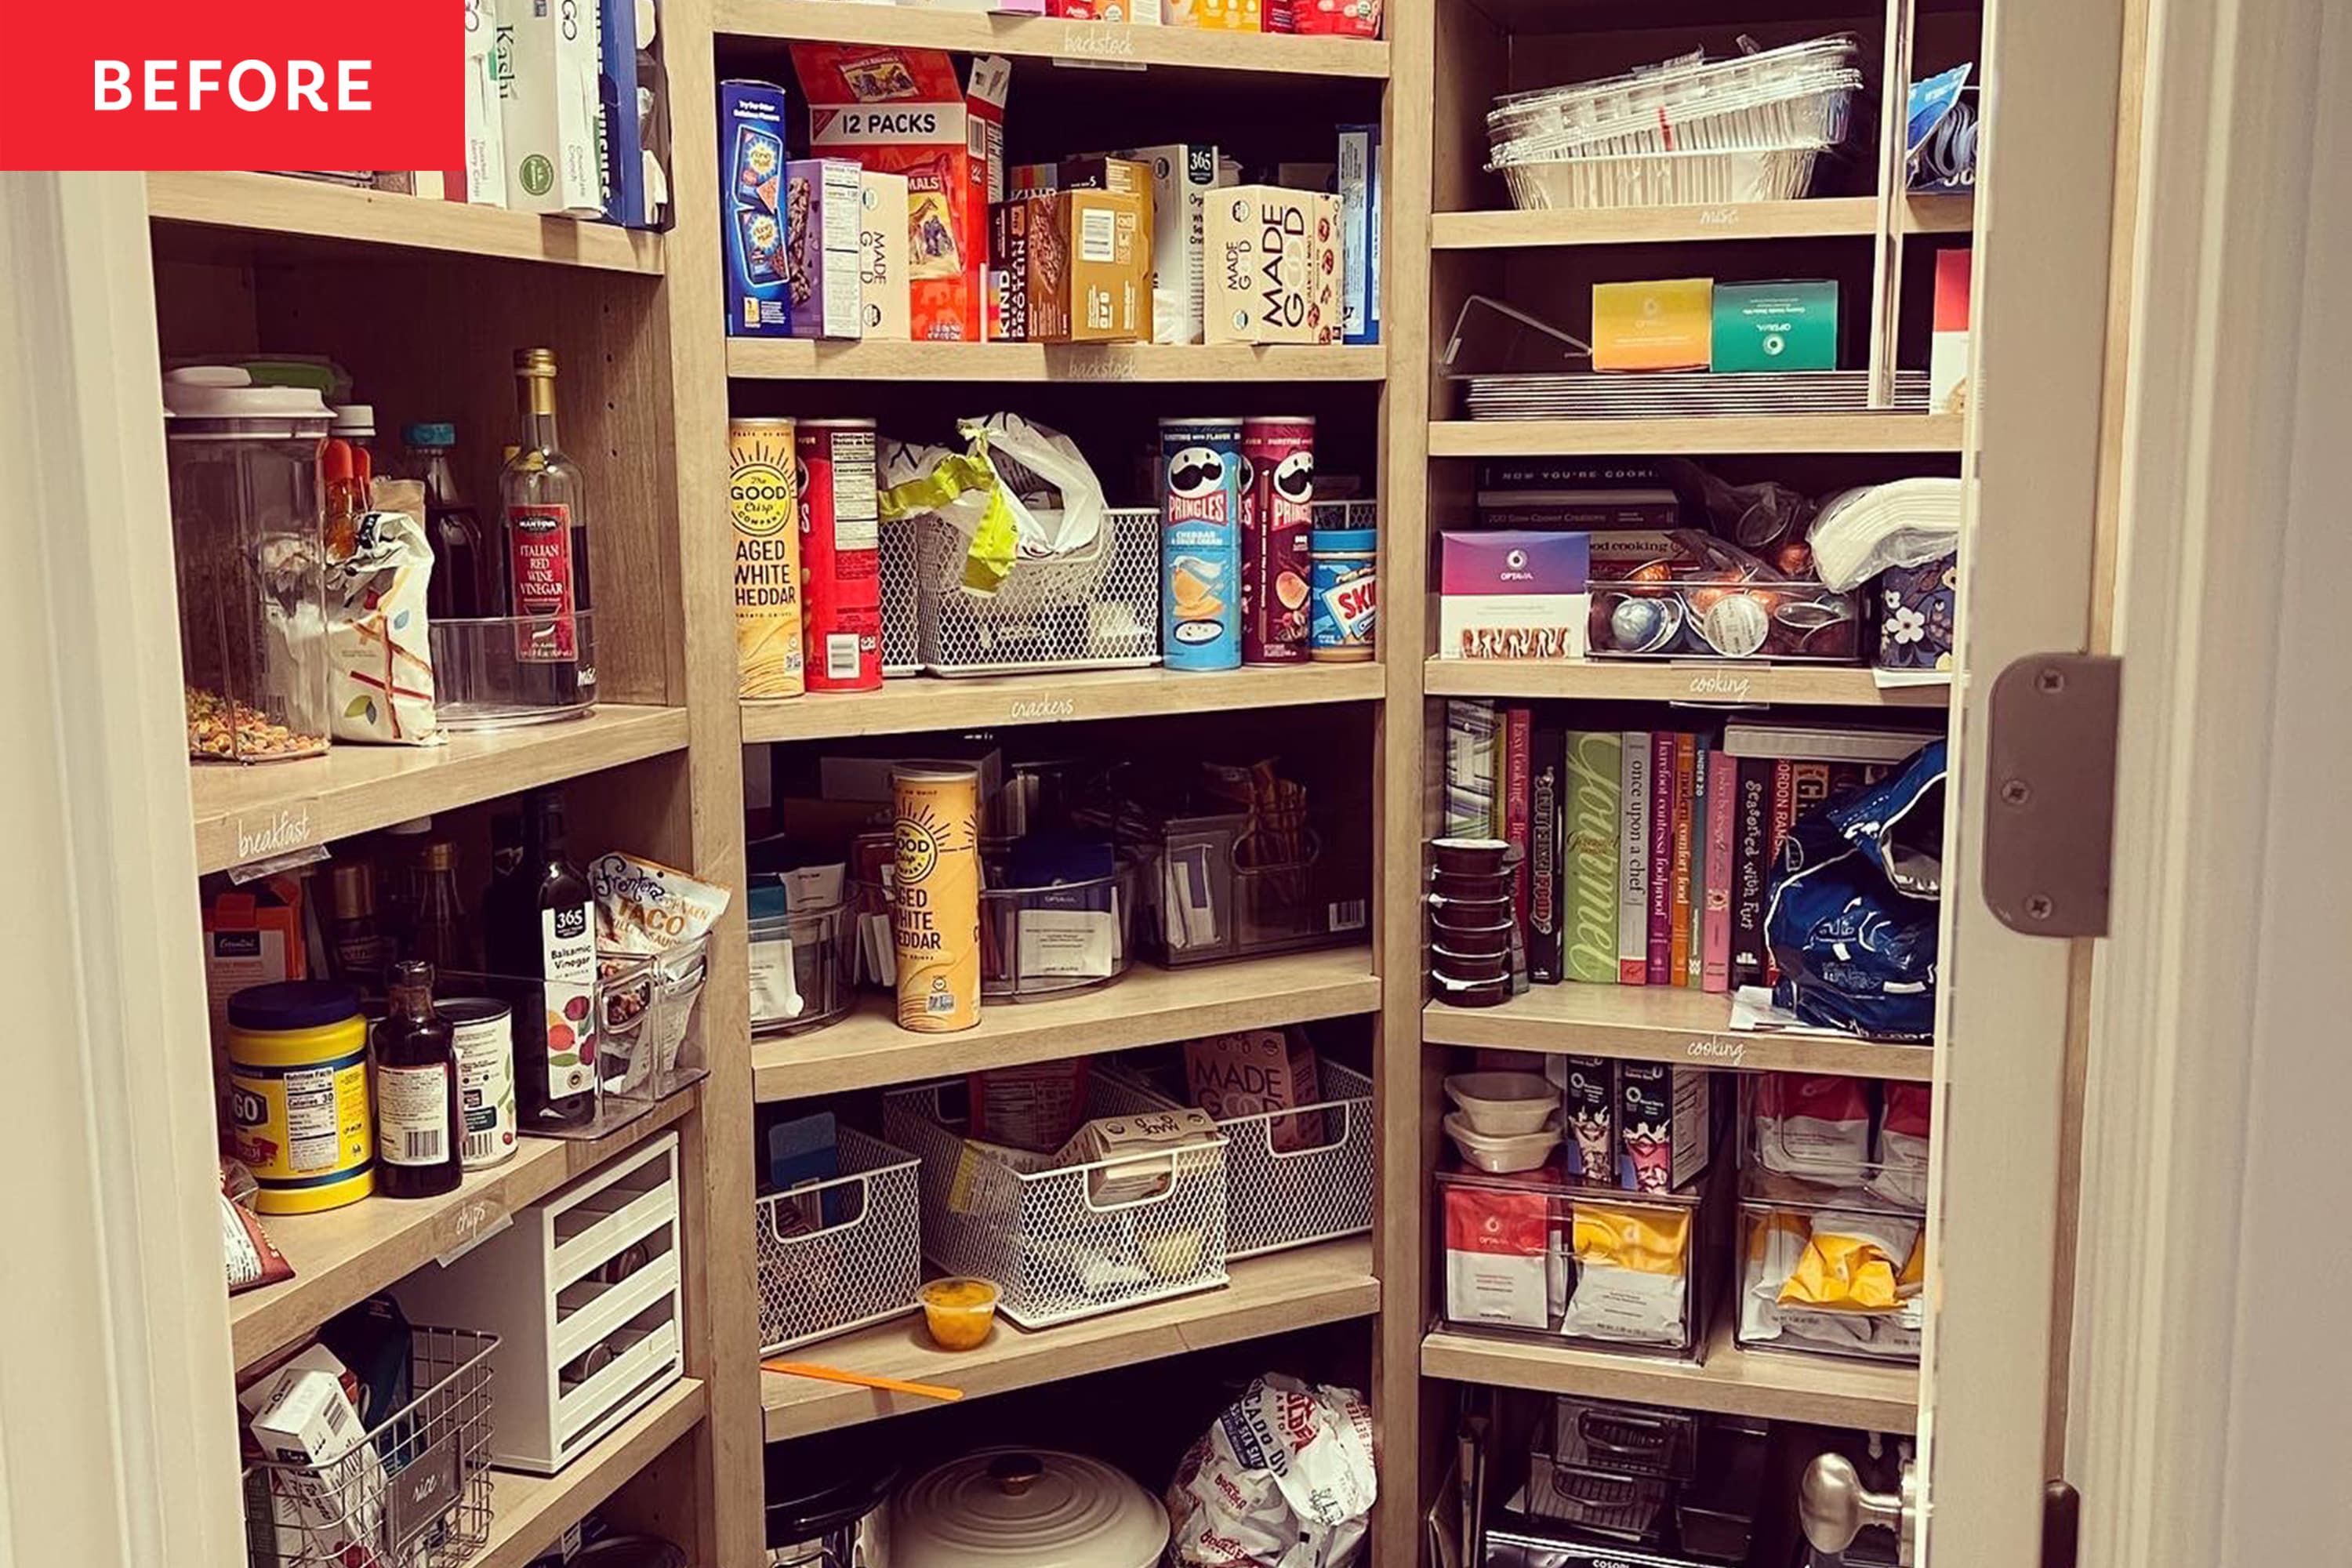 https://cdn.apartmenttherapy.info/image/upload/v1667492908/at/organize-clean/before-after/Brooke_Milton_Client_Pantry/BrookeMilton-Pantry-Before-32.jpg